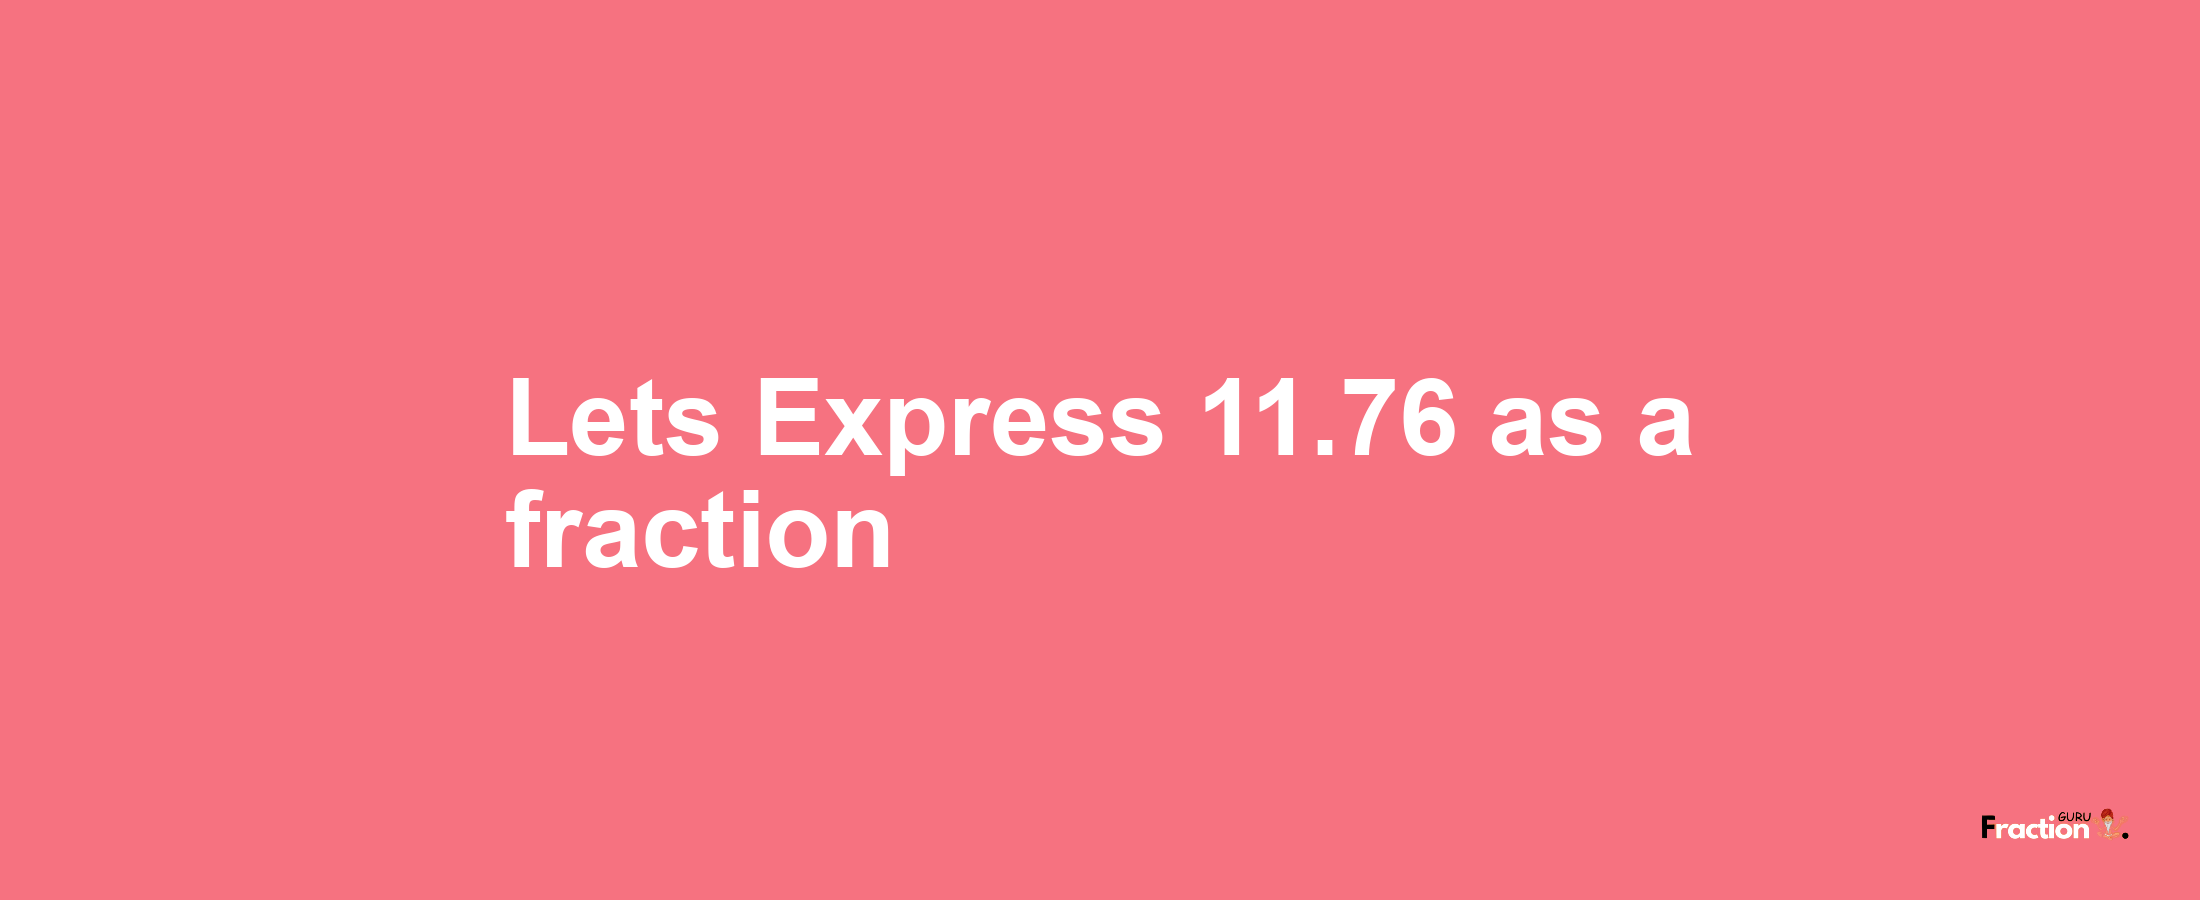 Lets Express 11.76 as afraction